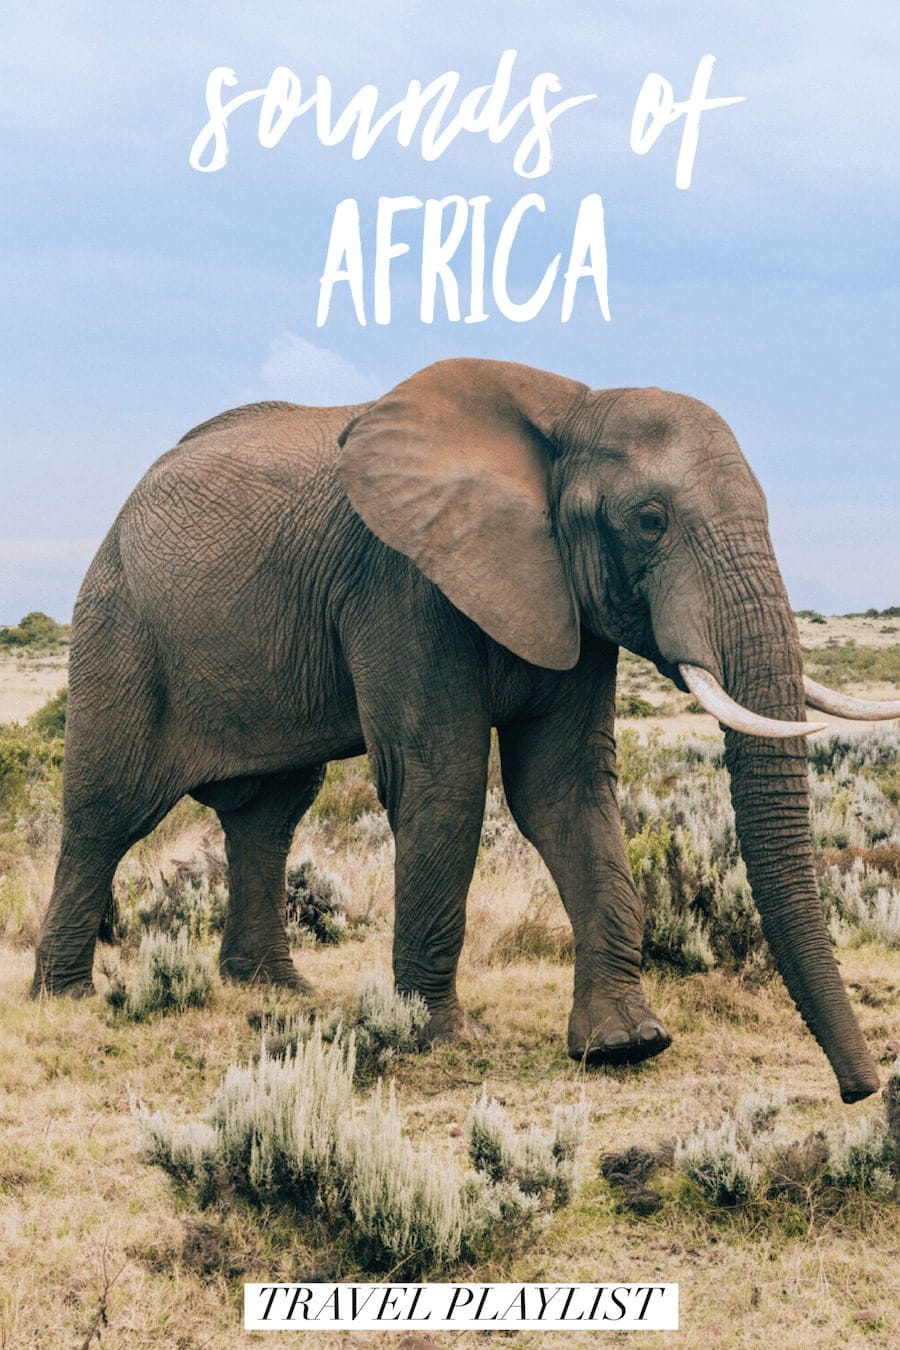 Travel Playlist: Sounds of Africa